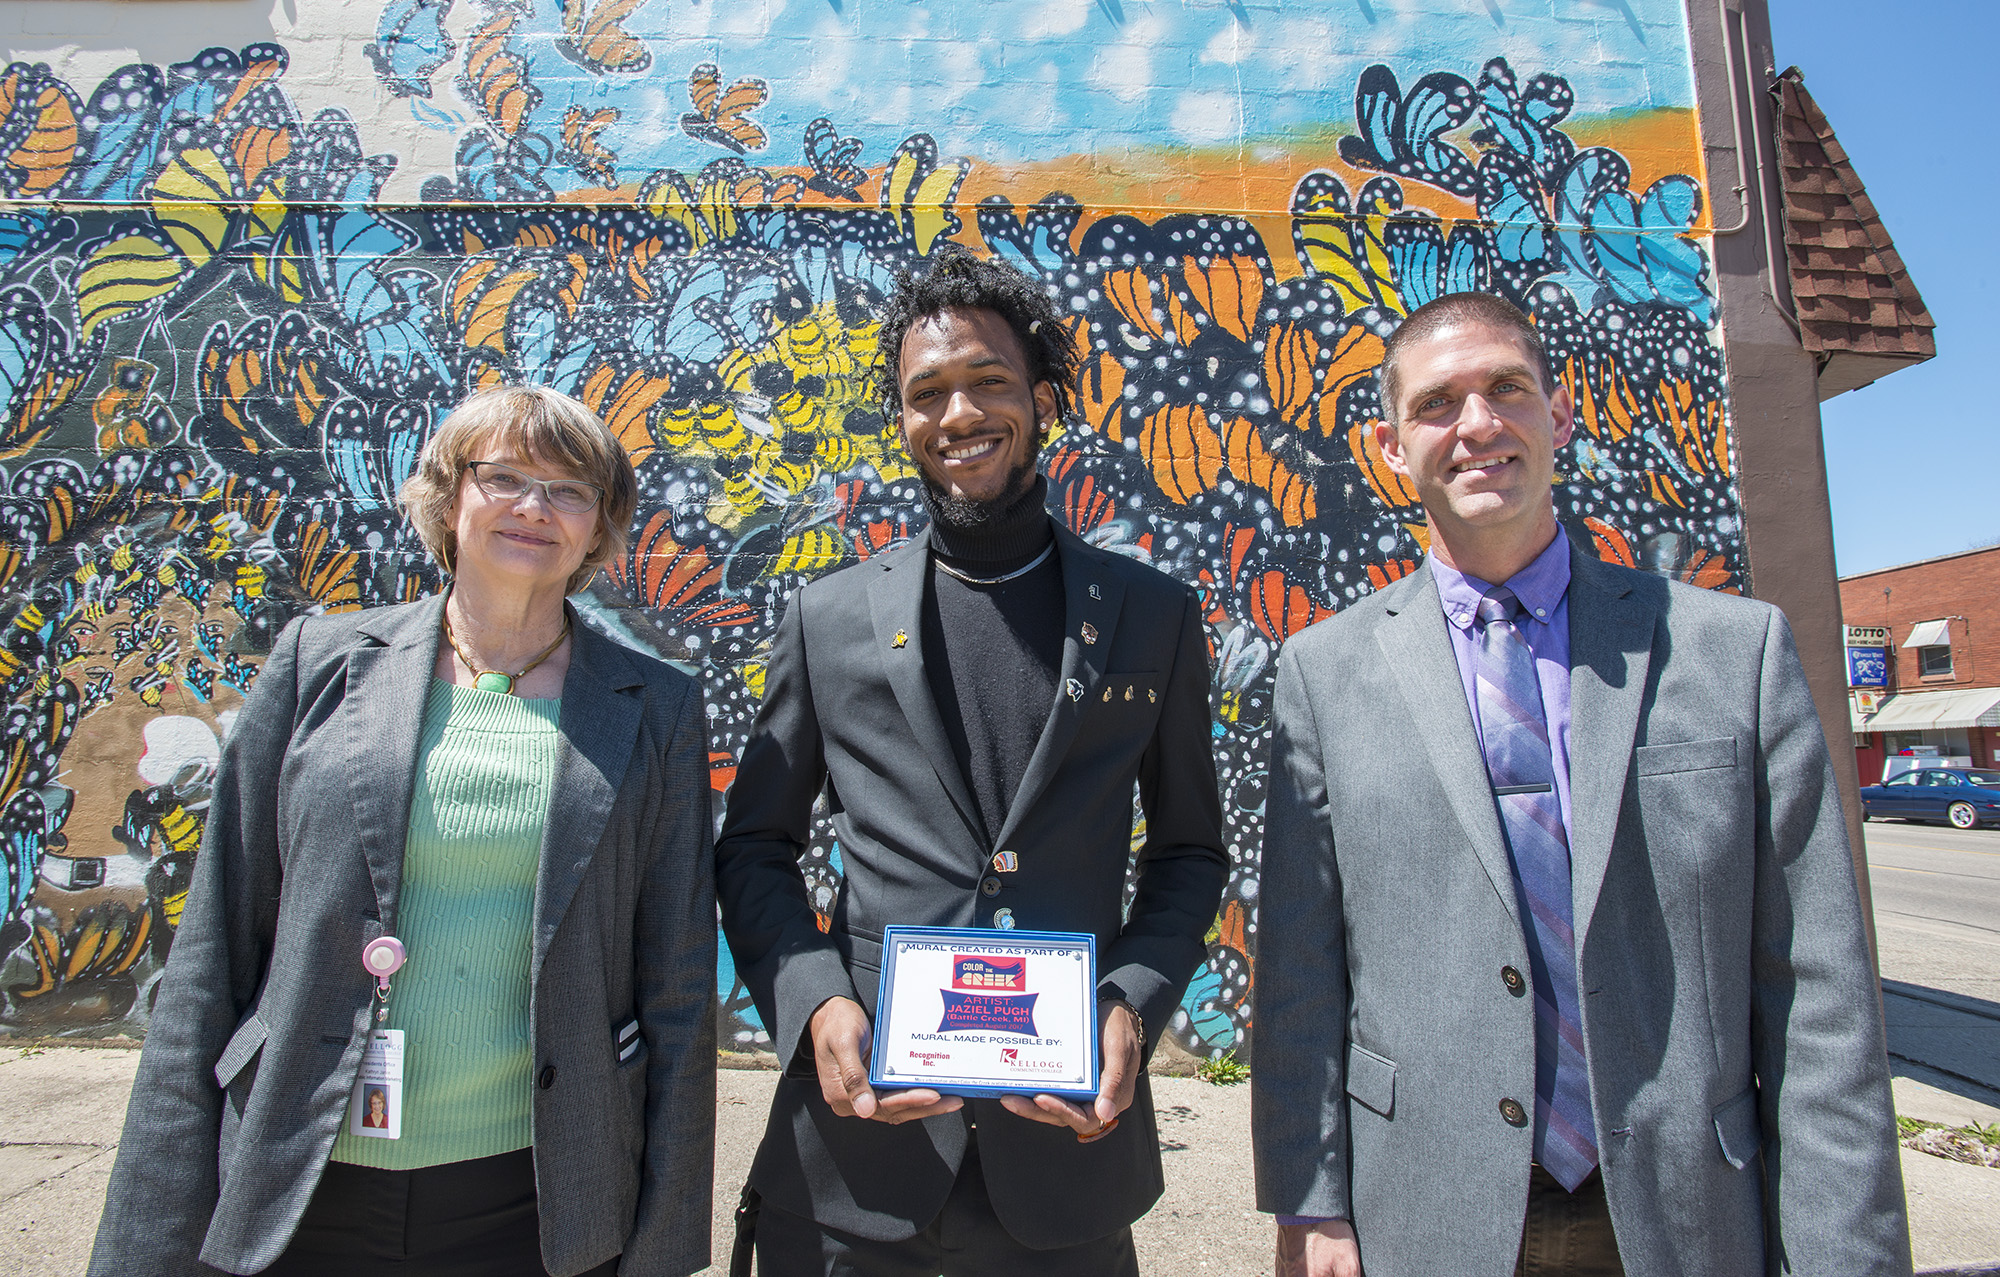 Pictured, from left to right, are KCC Media Design Manager Kathy Jarvie, artist Jaziel Pugh and KCC Director of Public Information and Marketing Eric Greene.